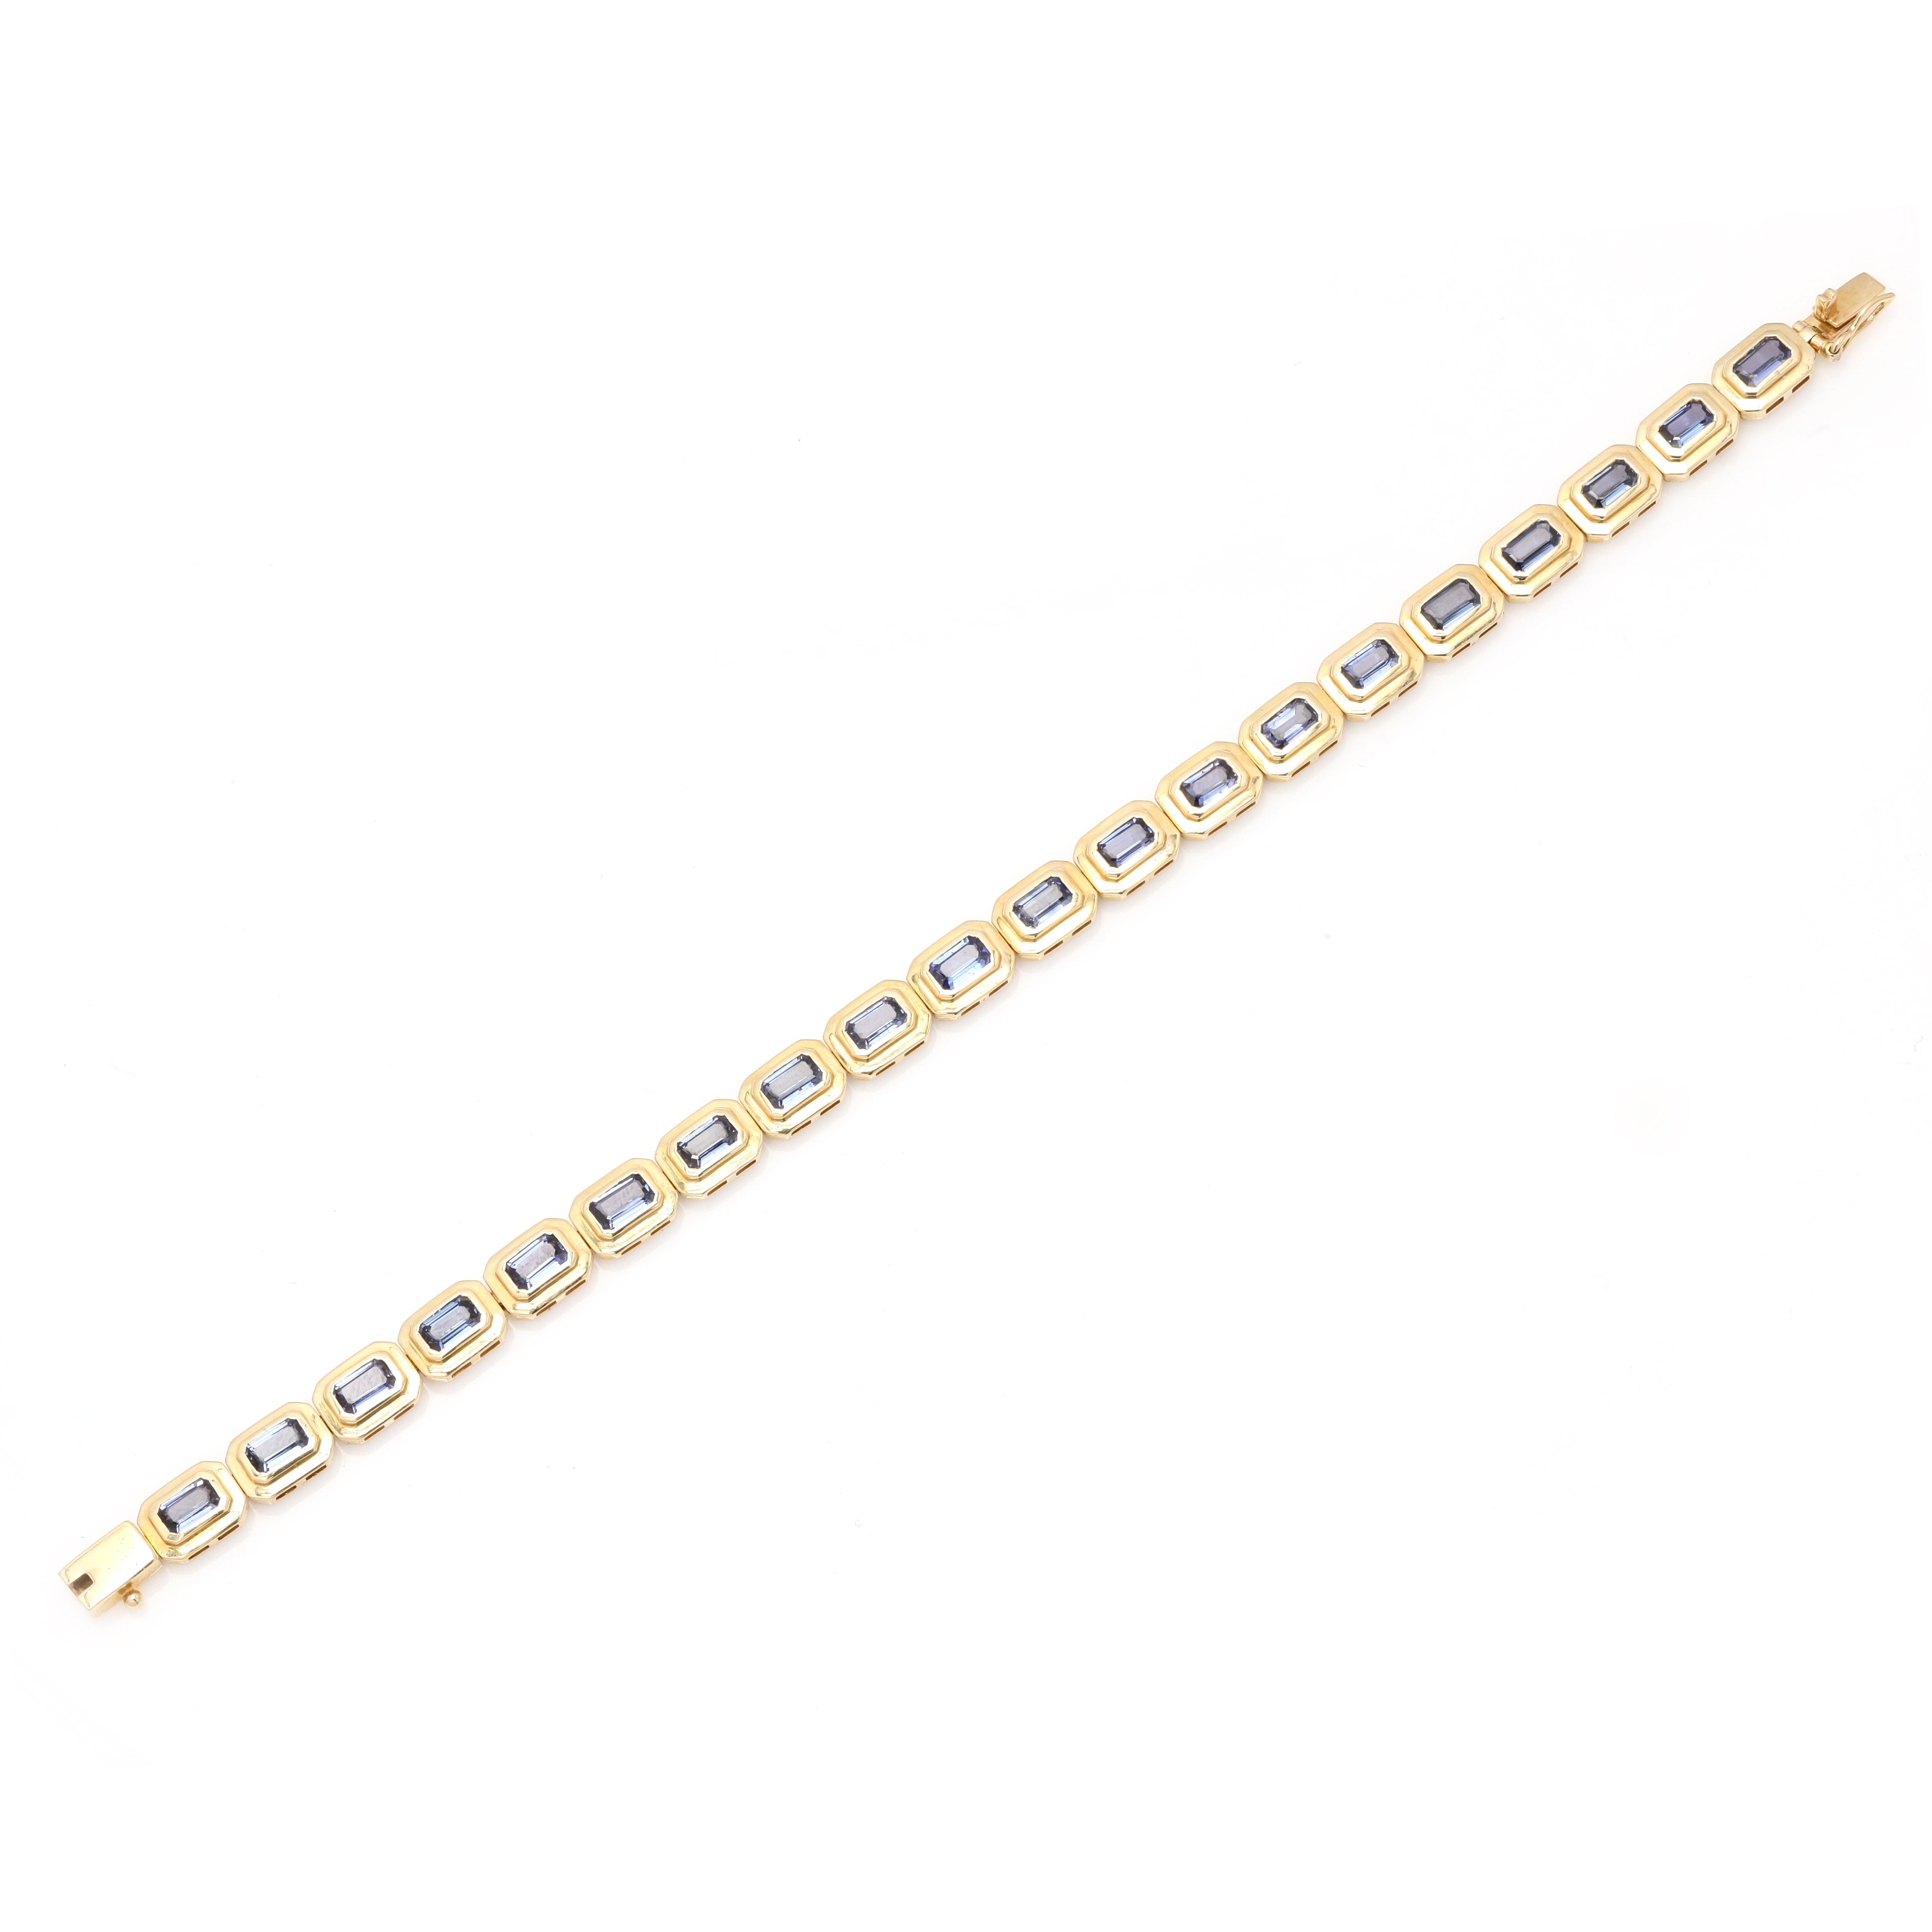 Tanzanite gemstone tennis bracelet in 14K gold. It has a perfect octagon cut gemstone to make you stand out on any occasion or an event.
Tanzanite facilitates higher concentration.
Featuring 6.01 cts of tanzanite mounted with solid 14K gold, this